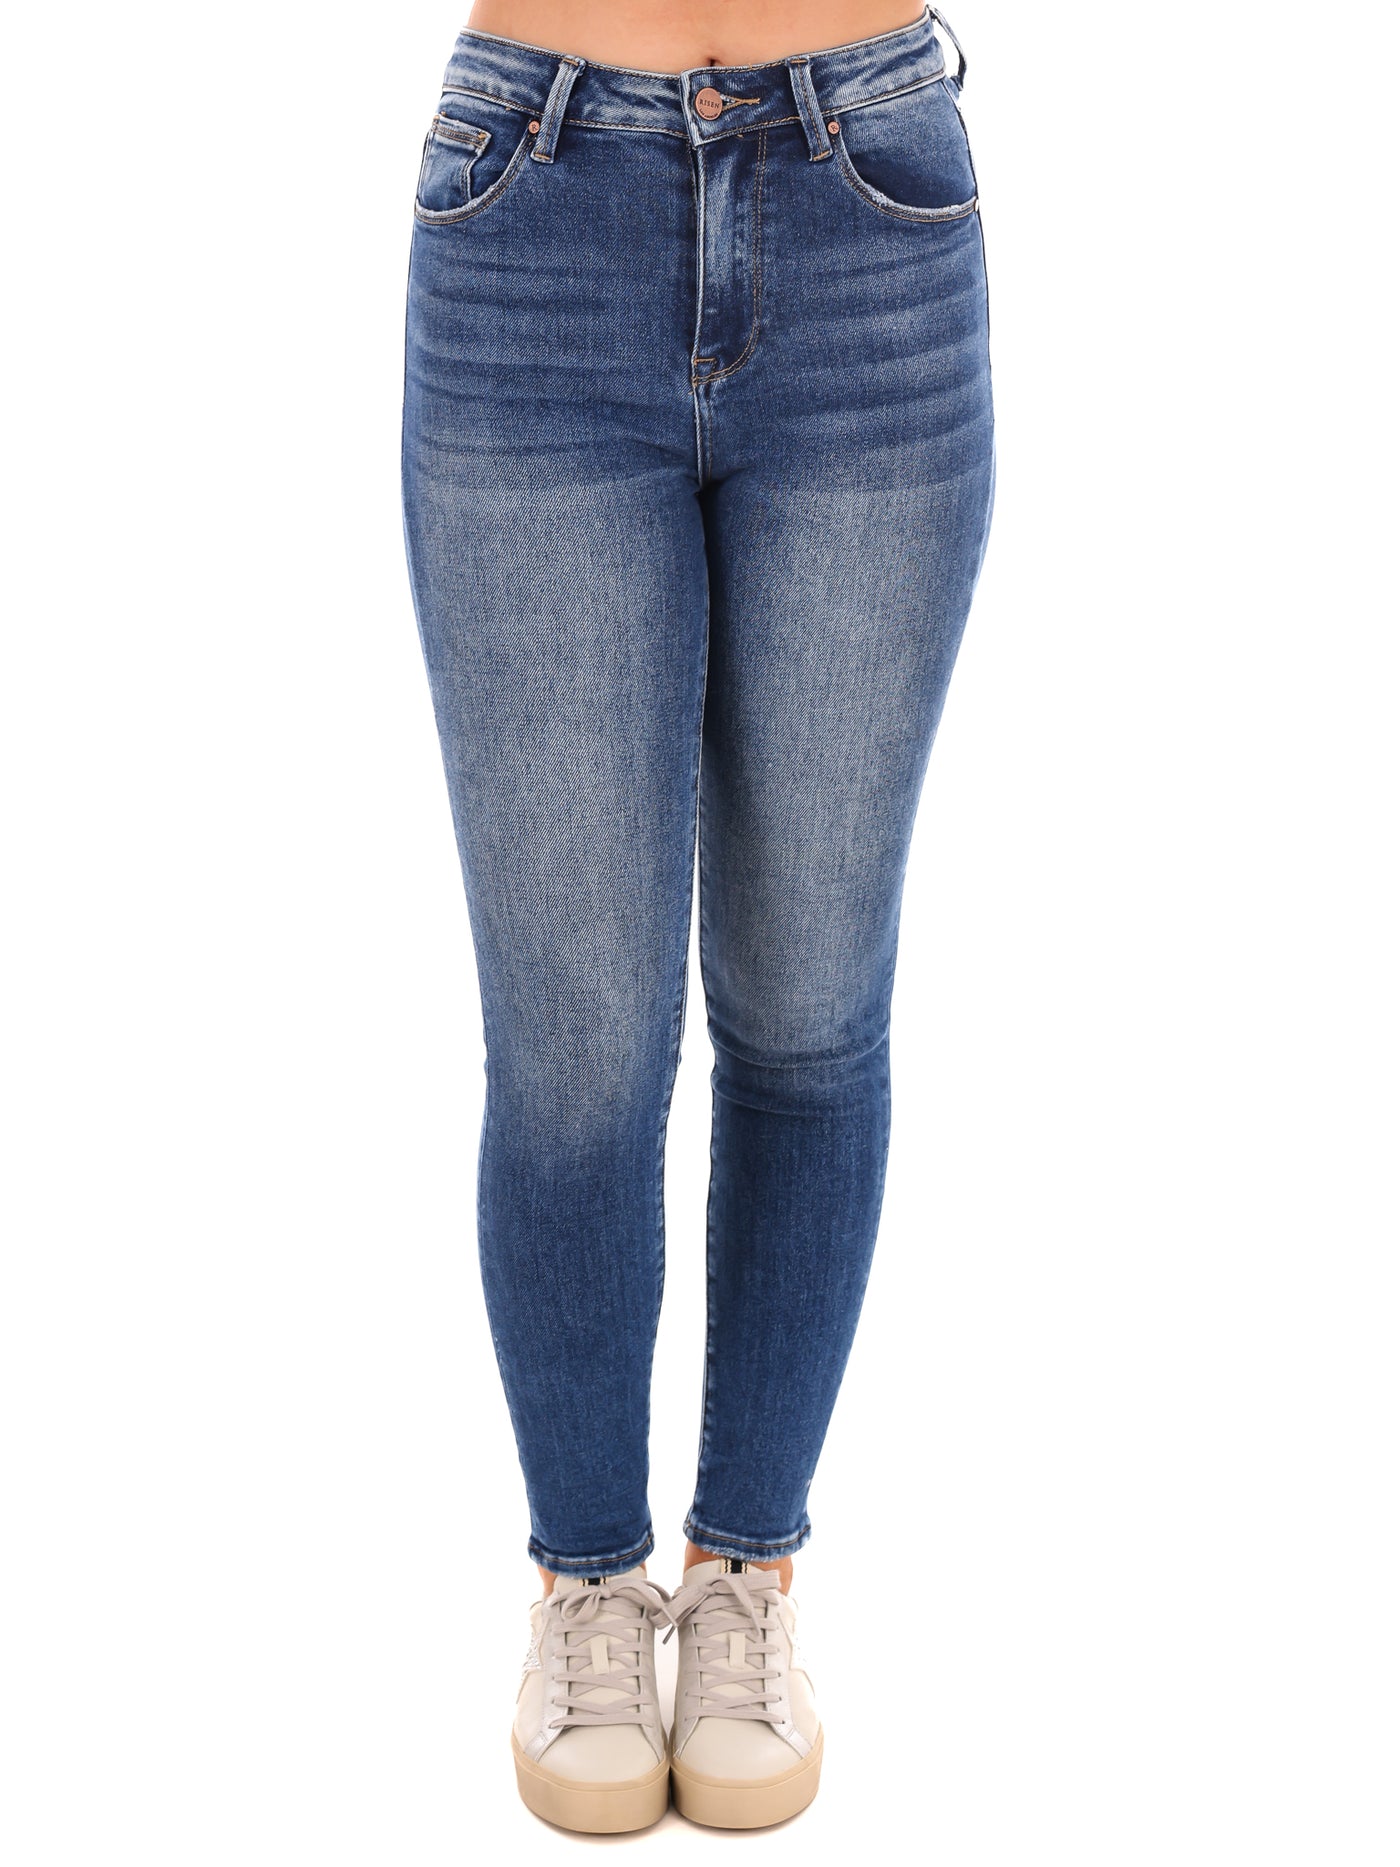 Never Alone High Rise Ankle Skinny Jean